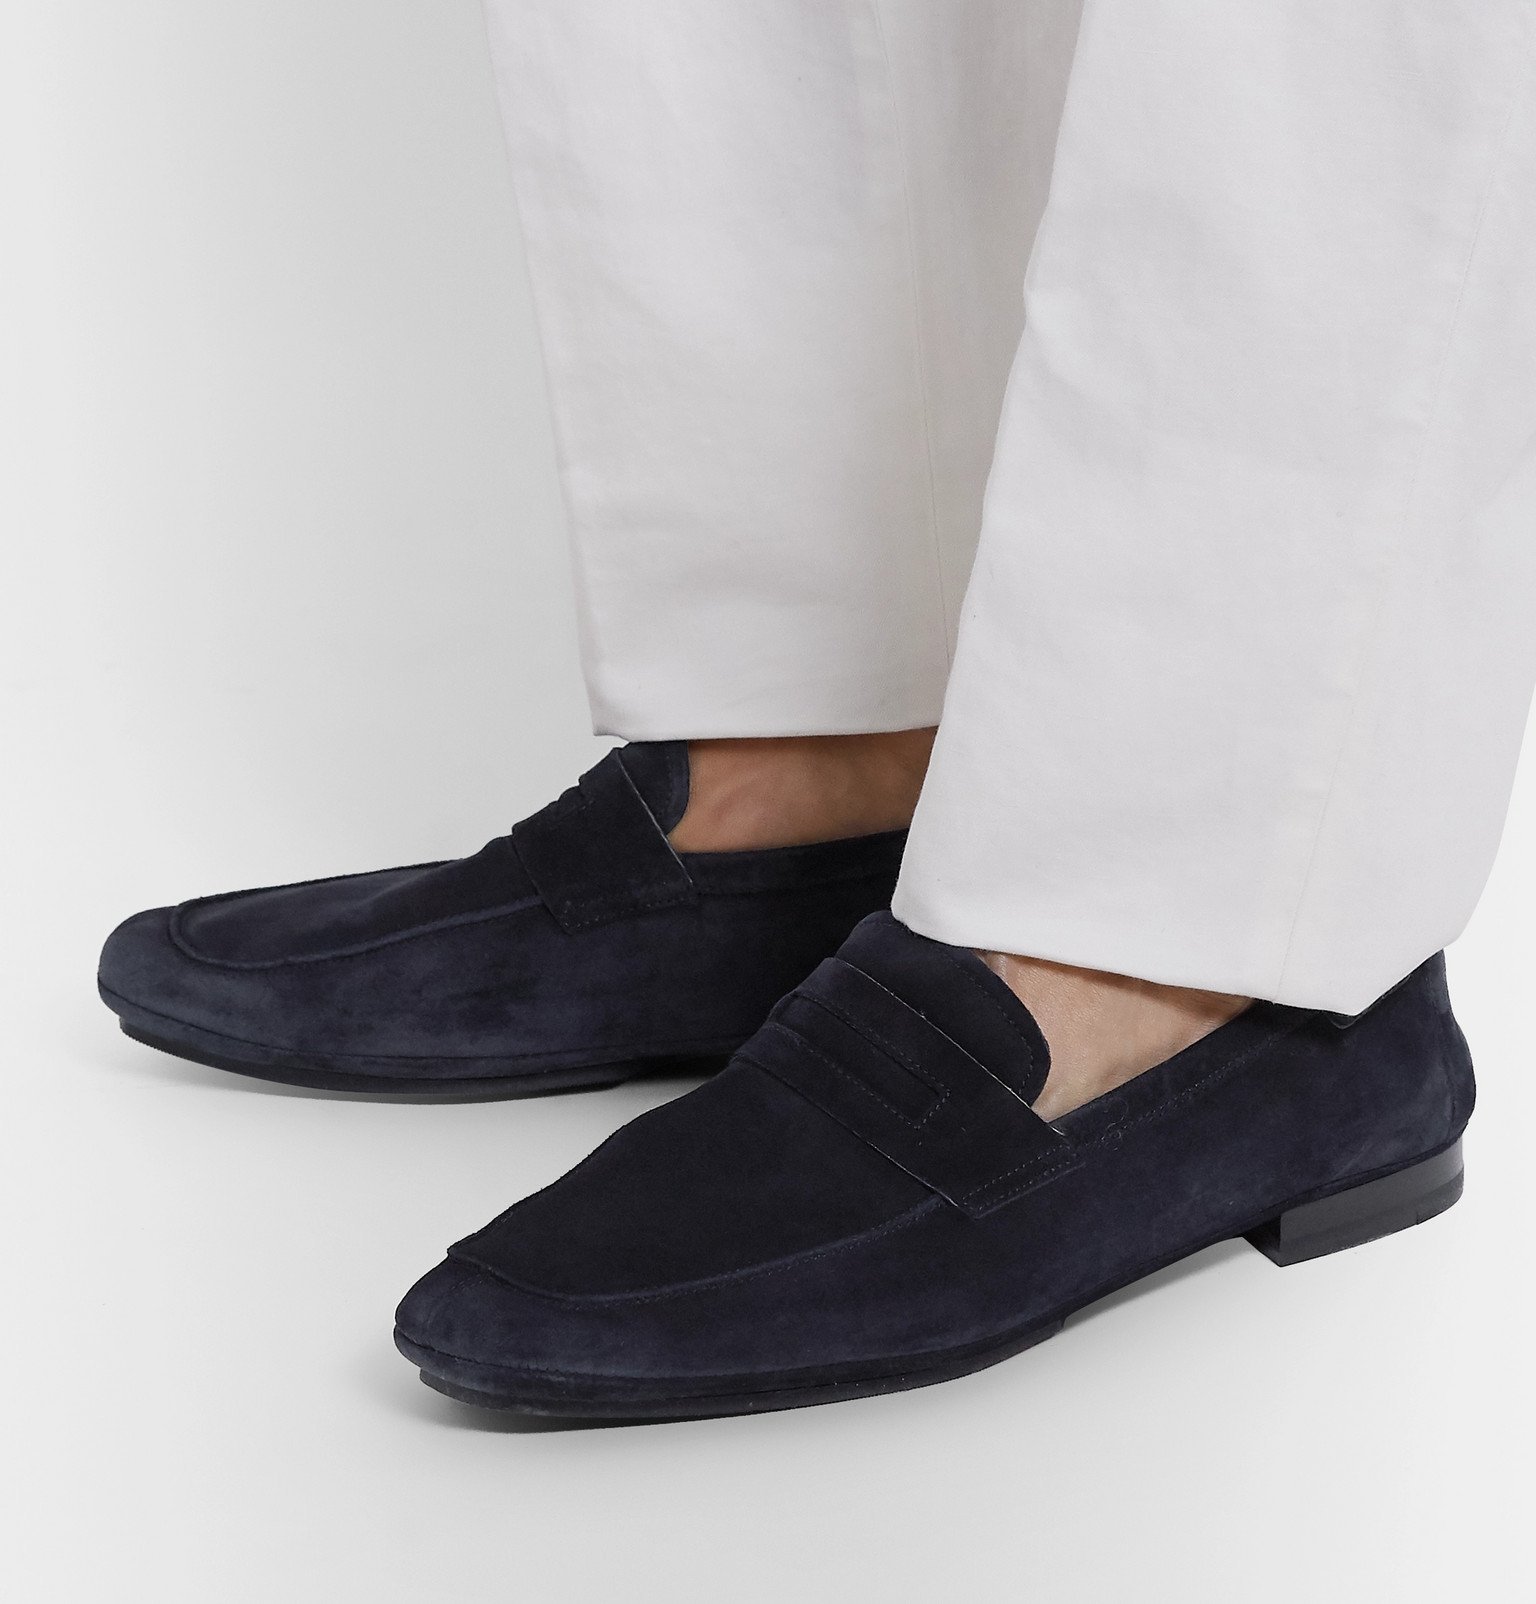 TOM FORD - Berrick Suede Penny Loafers - Blue TOM FORD